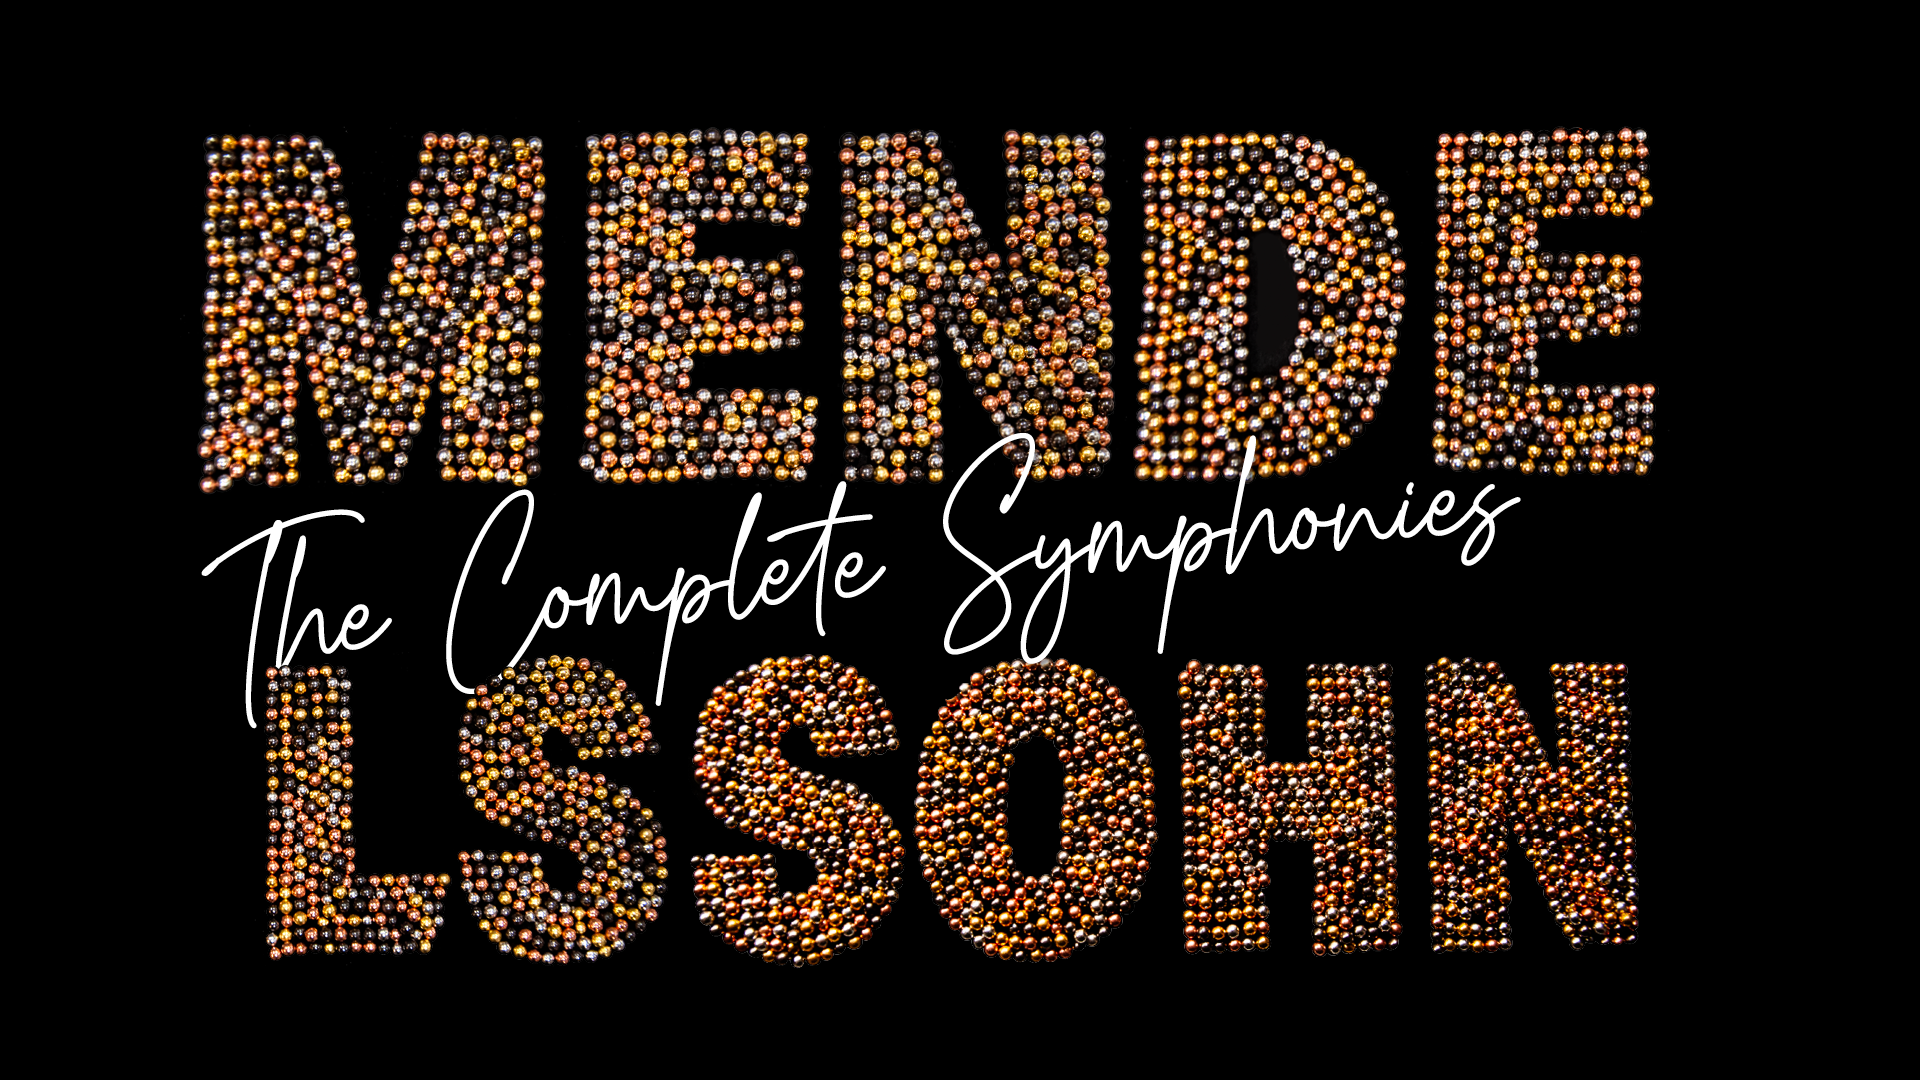 Text art of MENDELSSOHN The Complete Symphonies is displayed, with each letter filled with small, bright, multicolored dots against a black background.